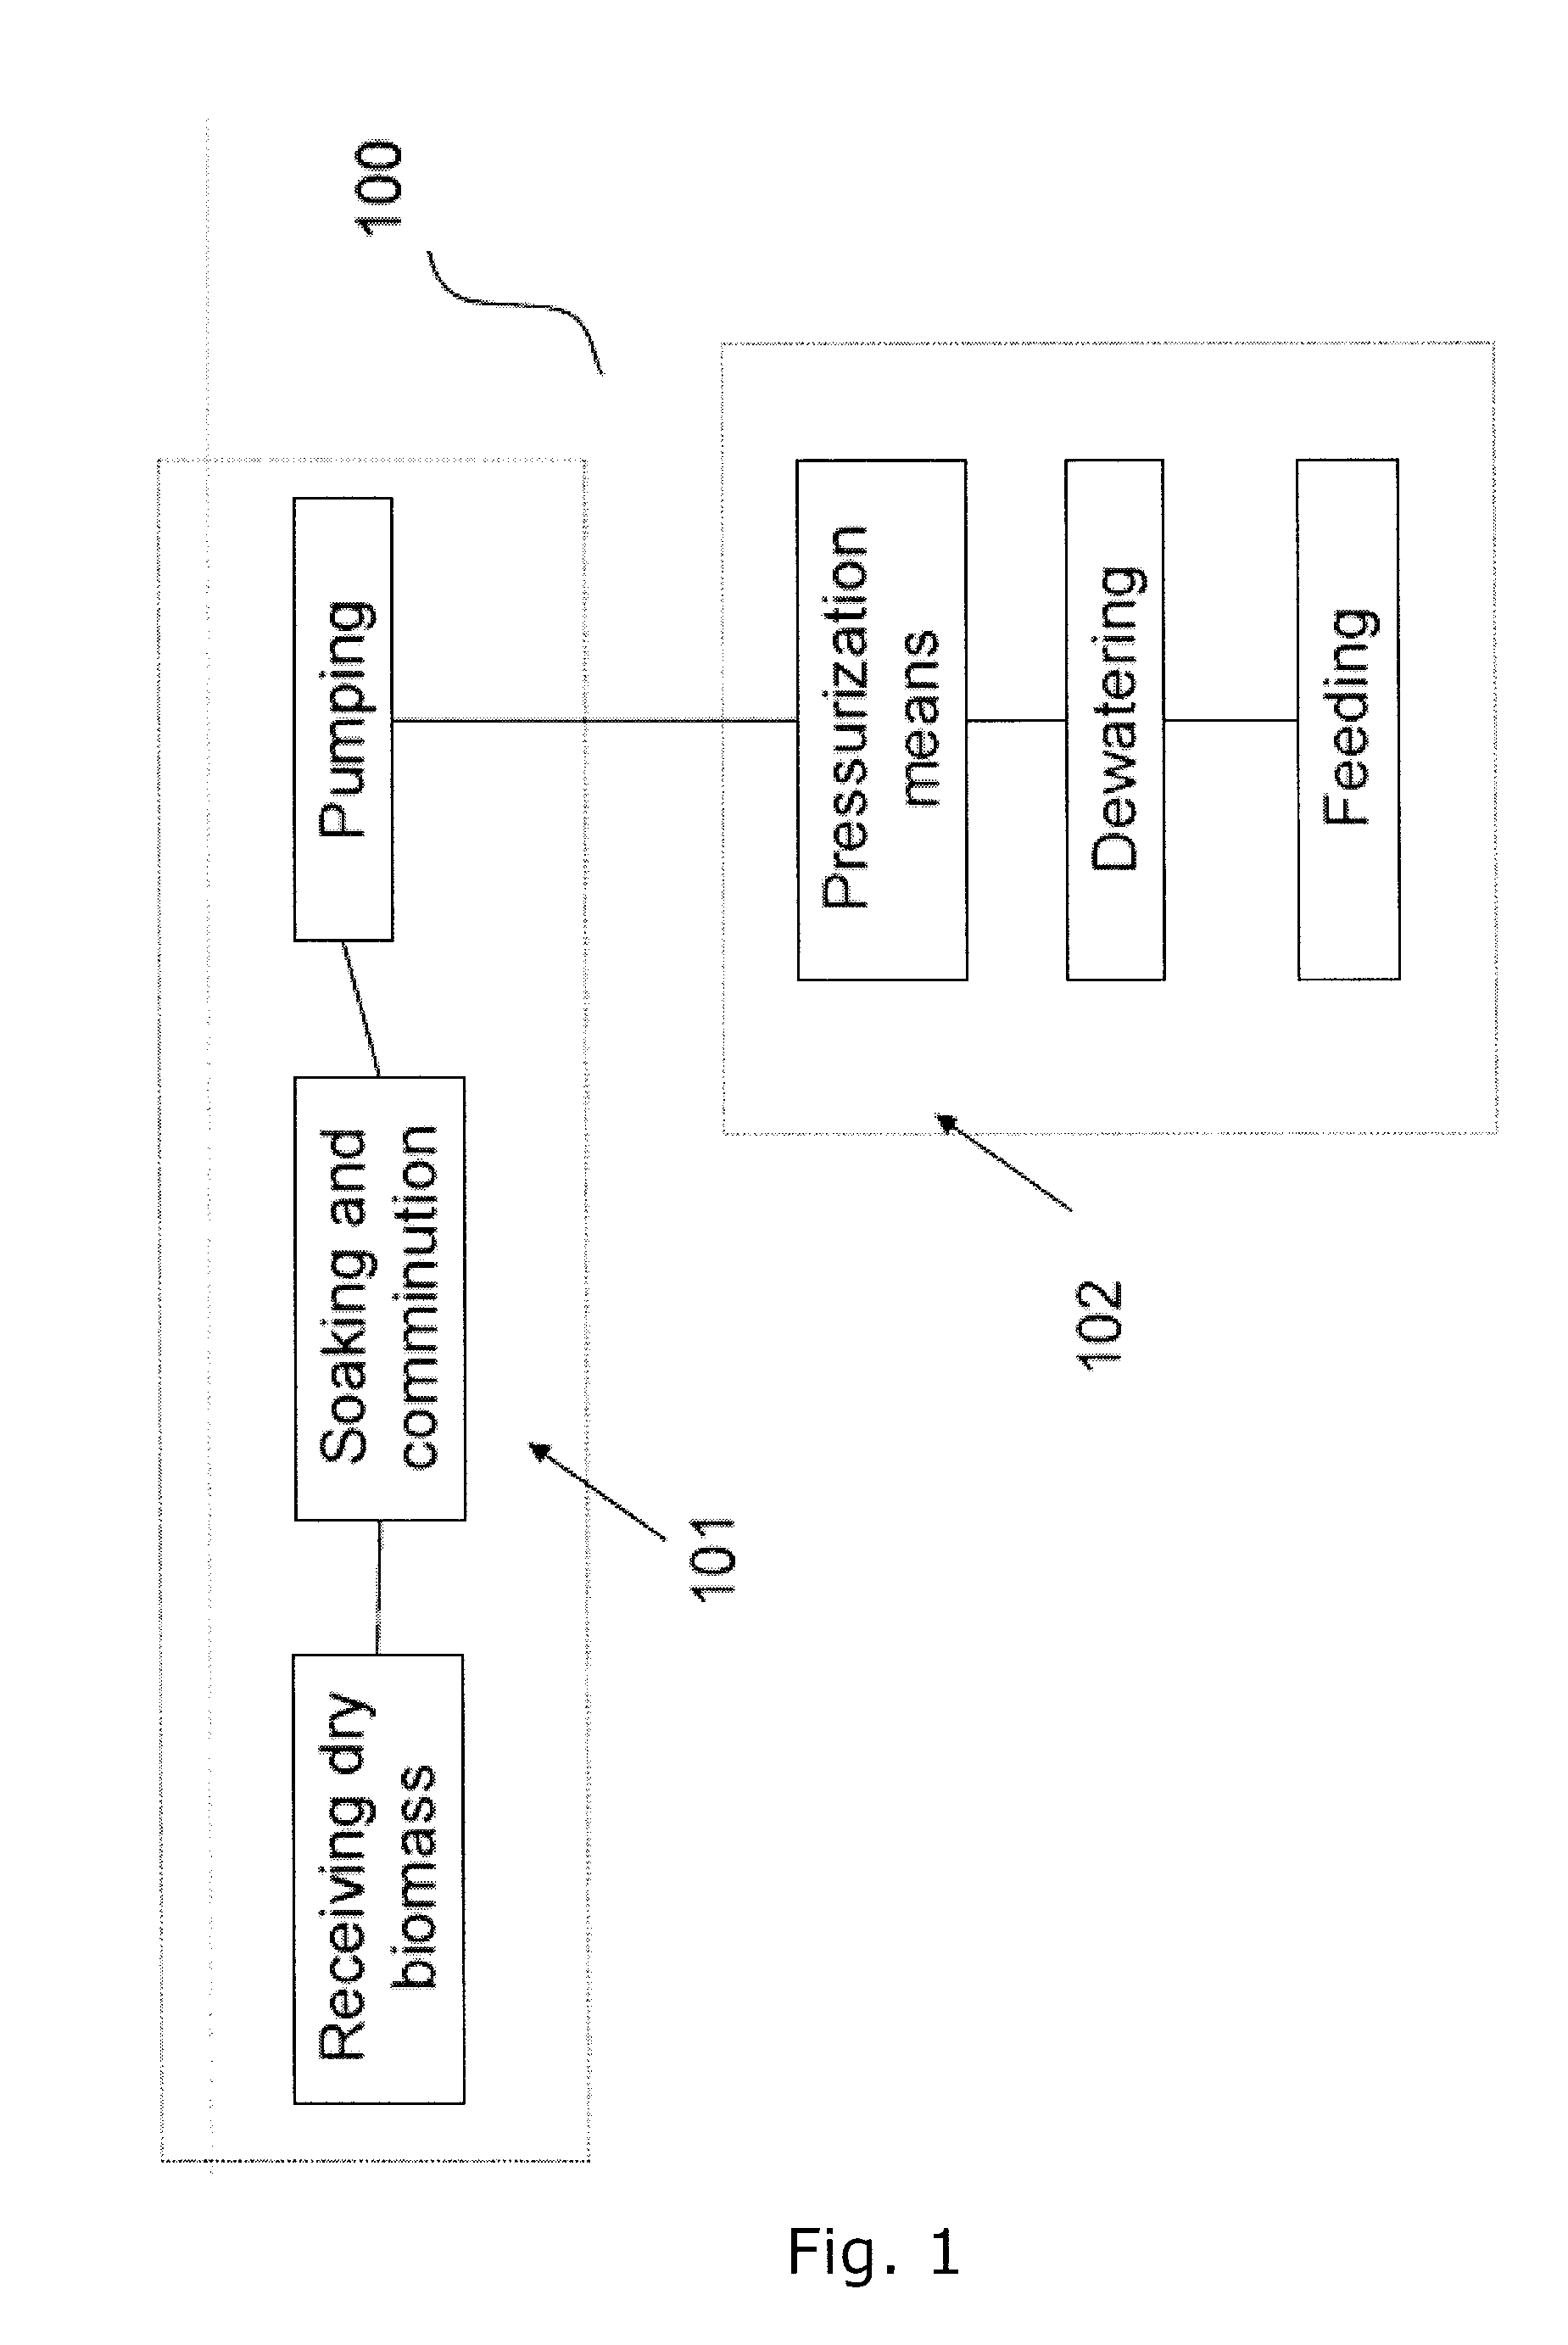 Method and apparatus for in-feeding of matter to a process reactor